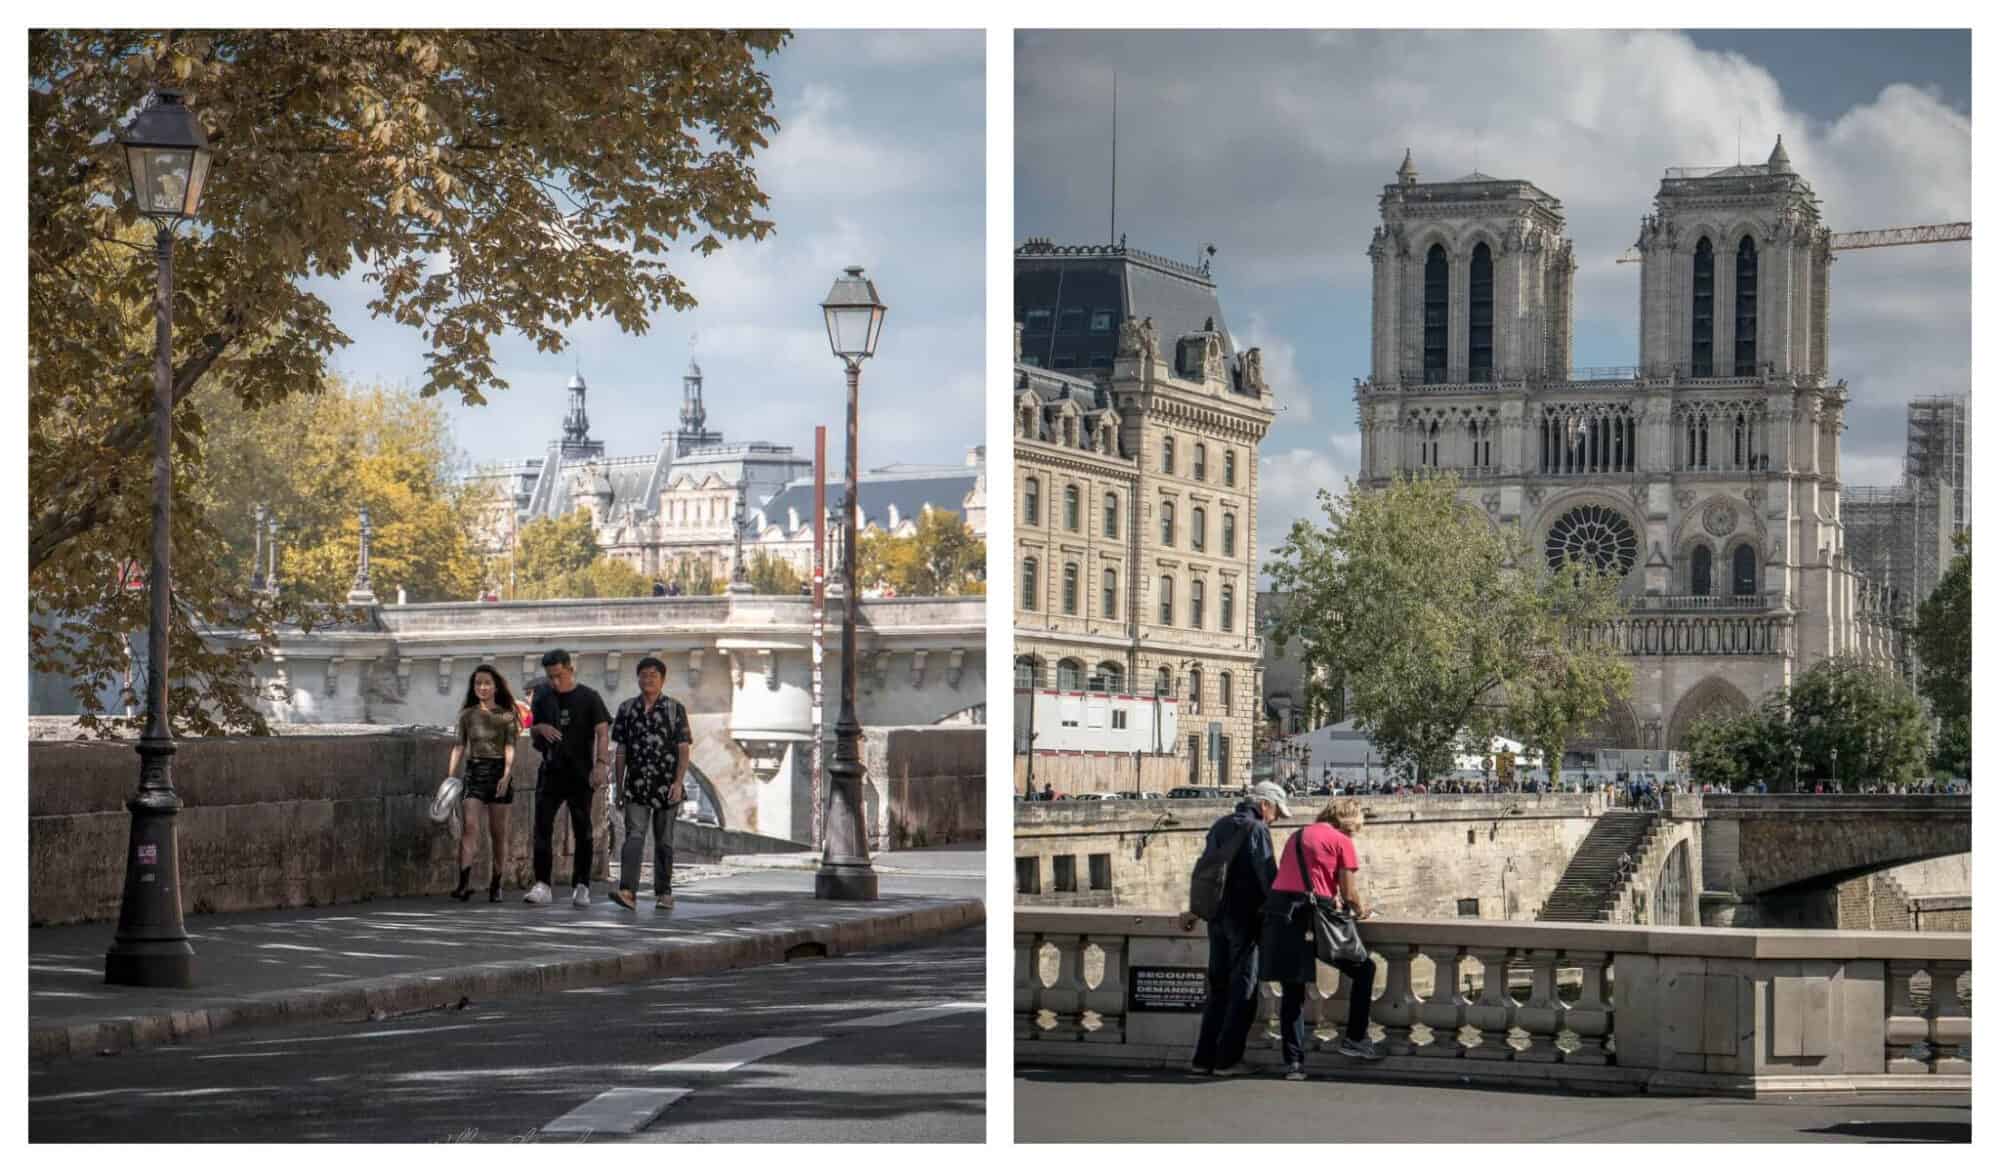 Left: Three friends stroll across Pont Neuf in Paris, the sun shining as they walk under the shade of a green tree and street lamp in the city. Right: An older couple look down into the Seine river of Paris as they take a break from their stroll near Notre Dame in the summertime.